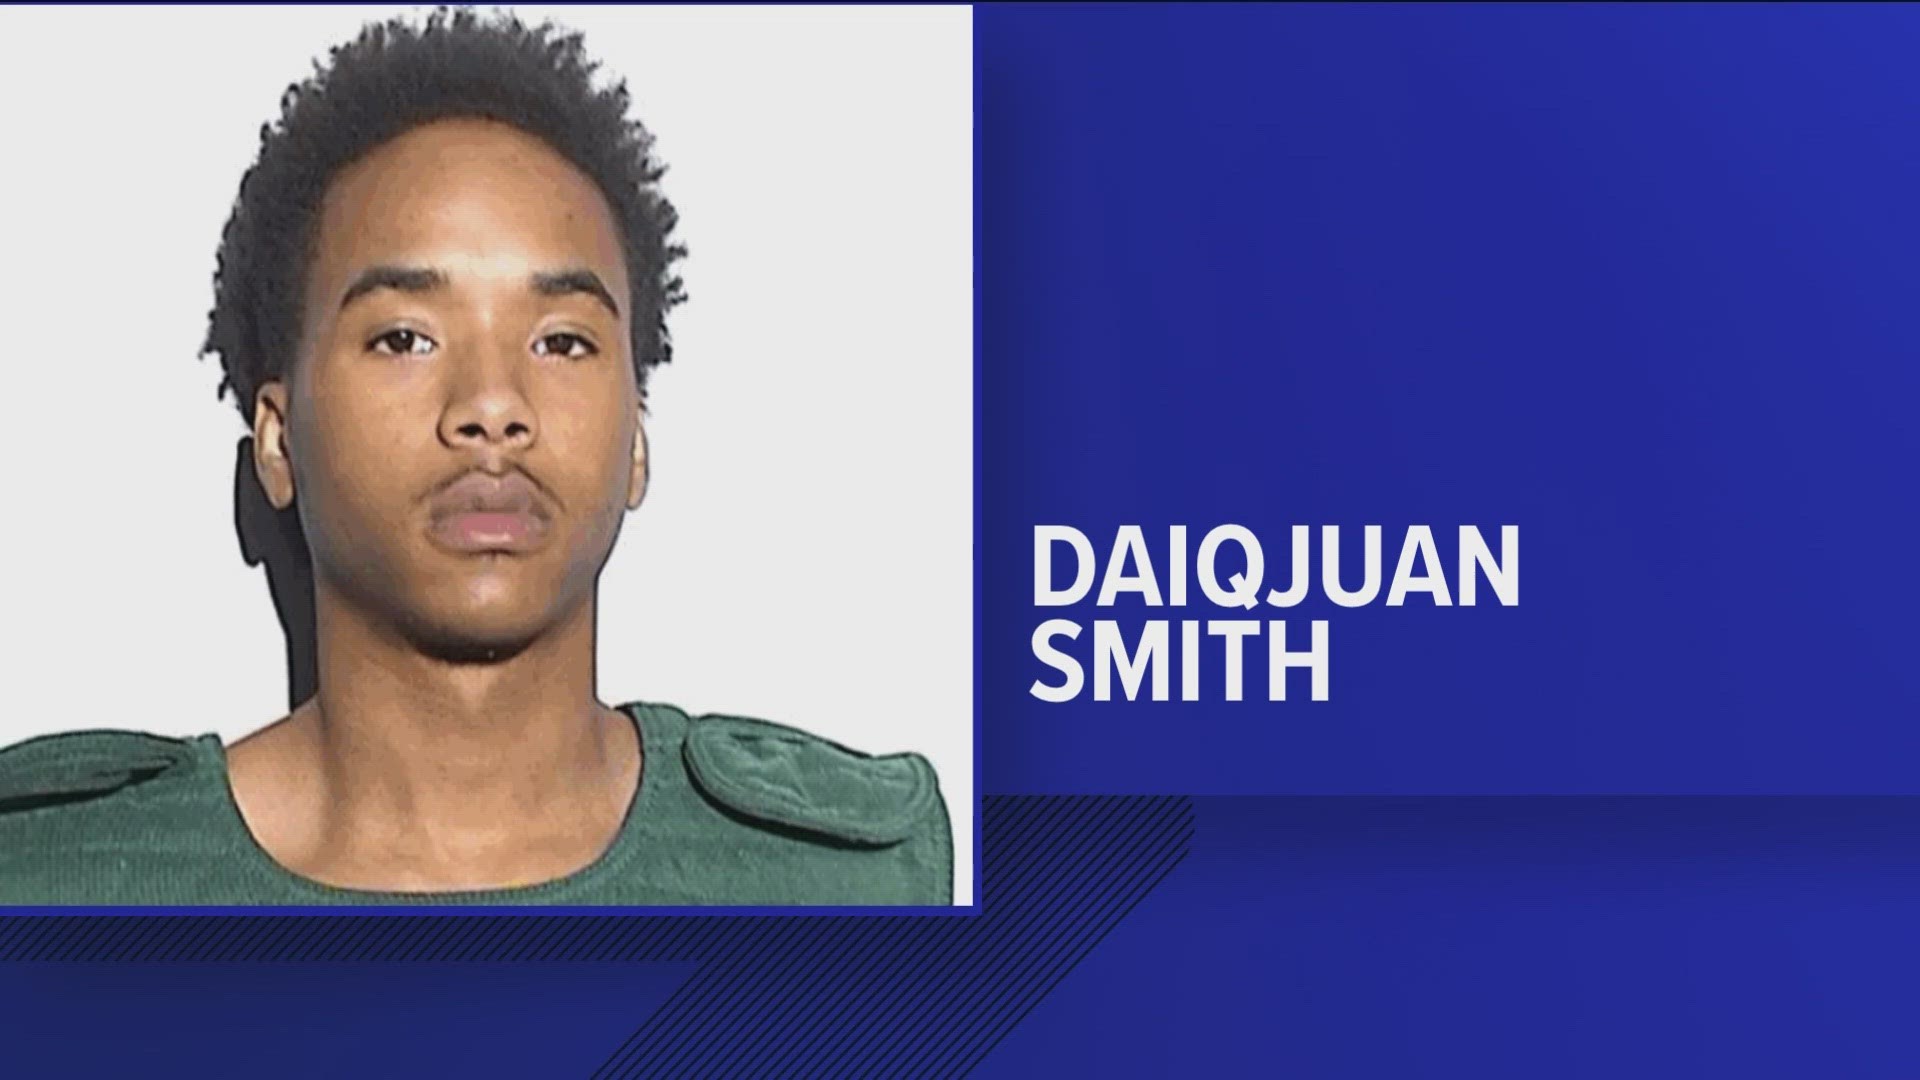 A Lucas County grand jury indicted Daiqjuan Smith, 21, on murder and felonious assault charges for the shooting that killed James Miller, 37, and injured another.